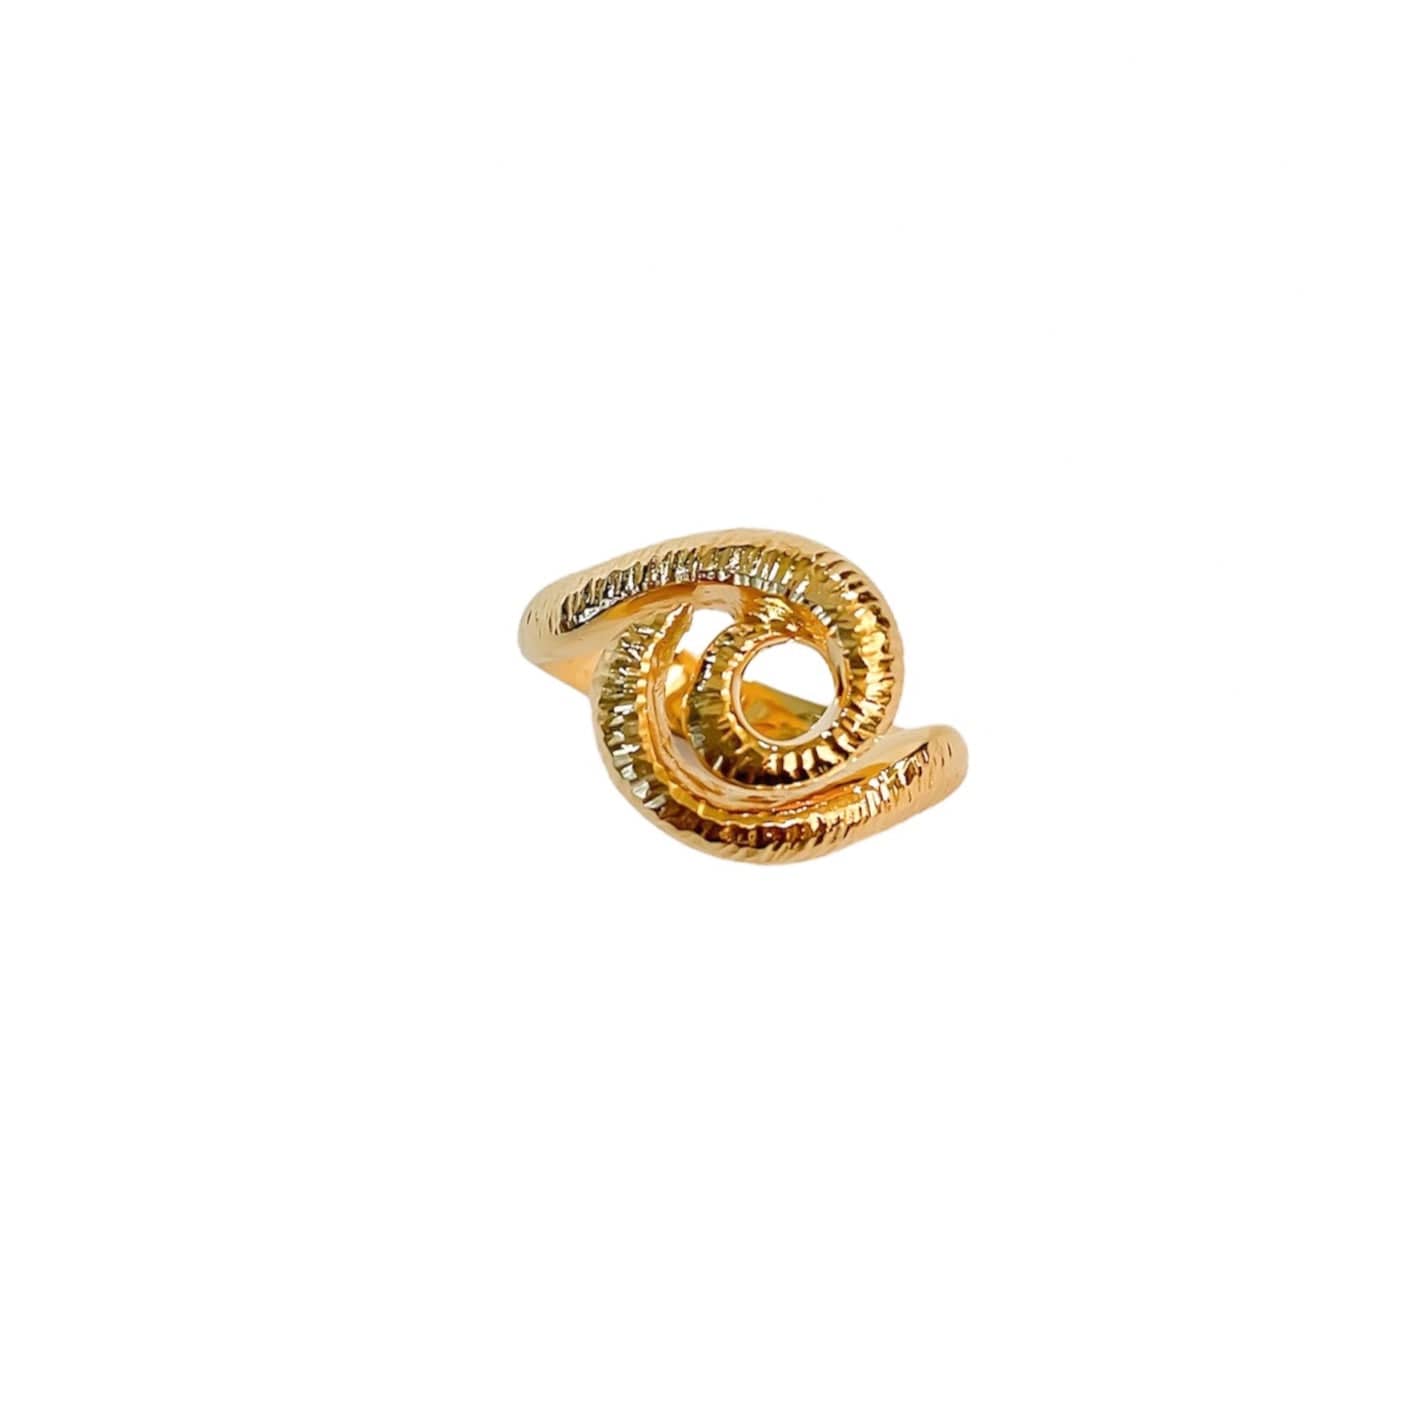 Surrea Raw gold plated silver ring.